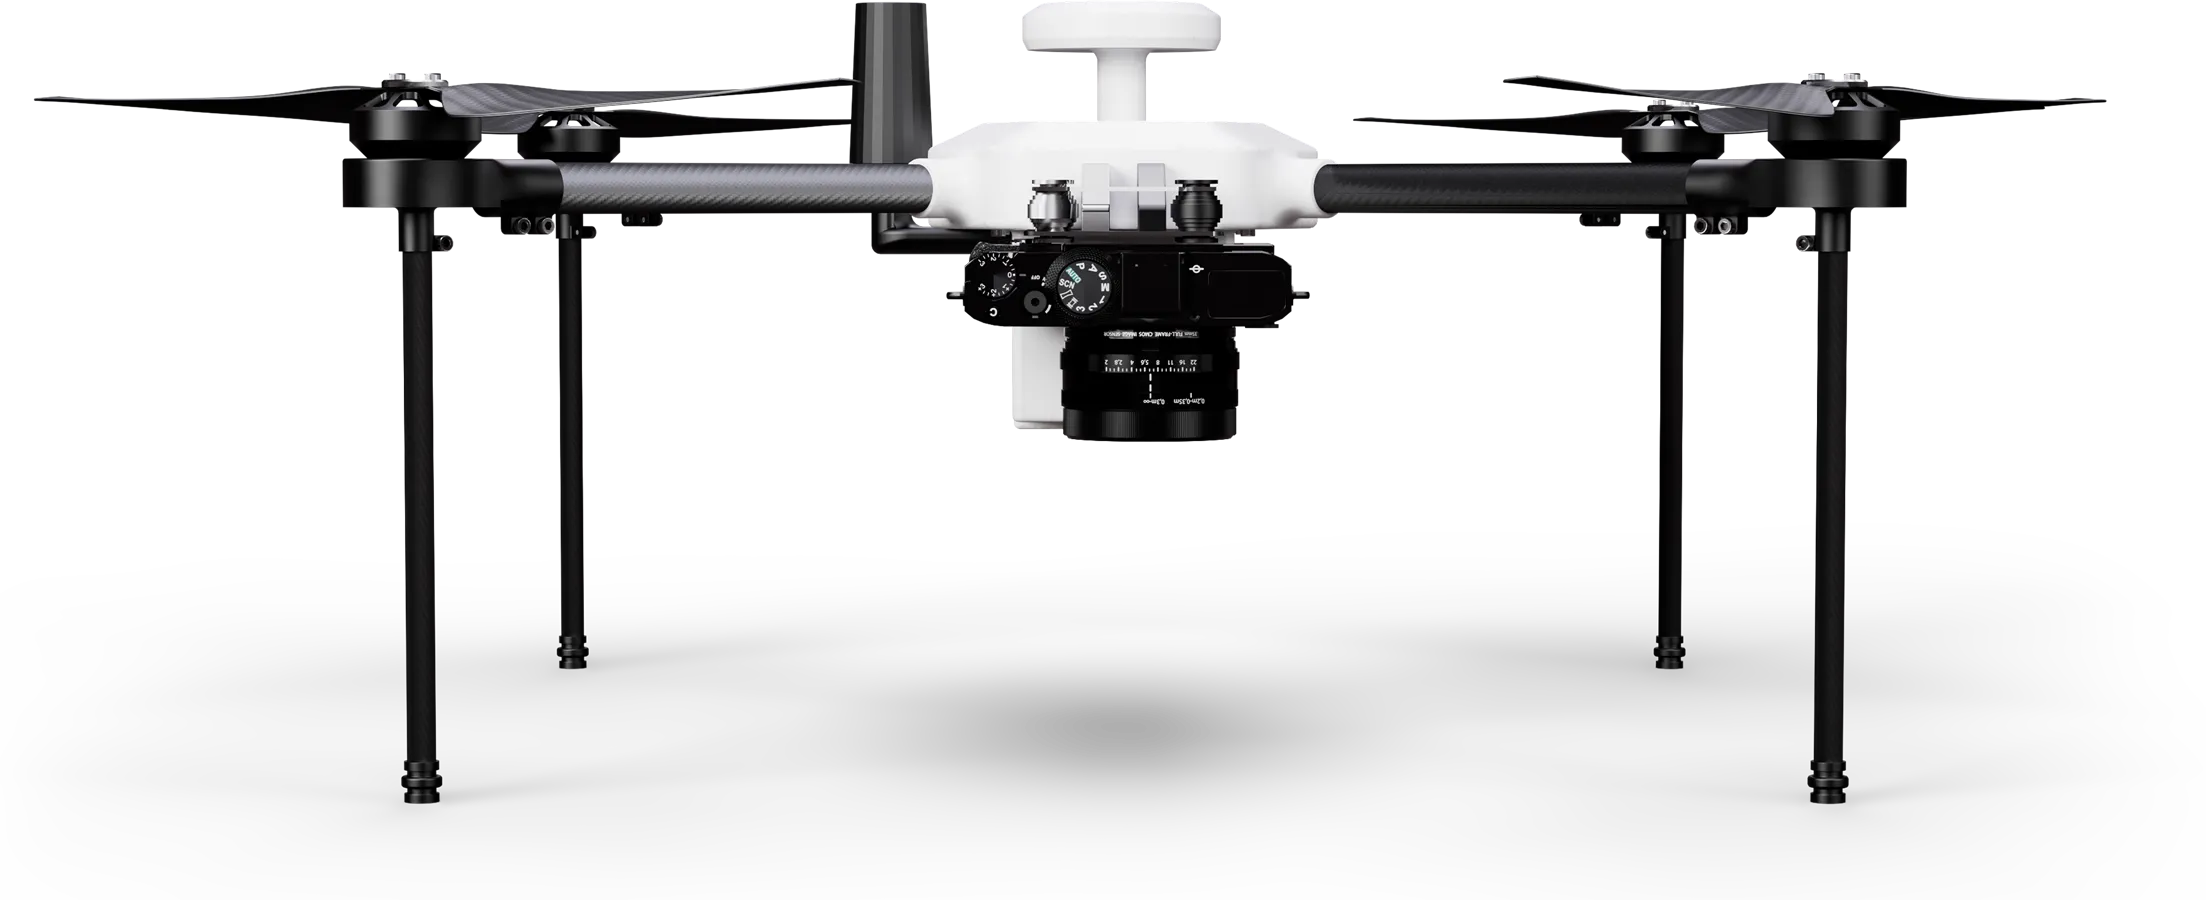 Exabotix Zelos Mapper Industrial drone front view with camera for surveying tasks.